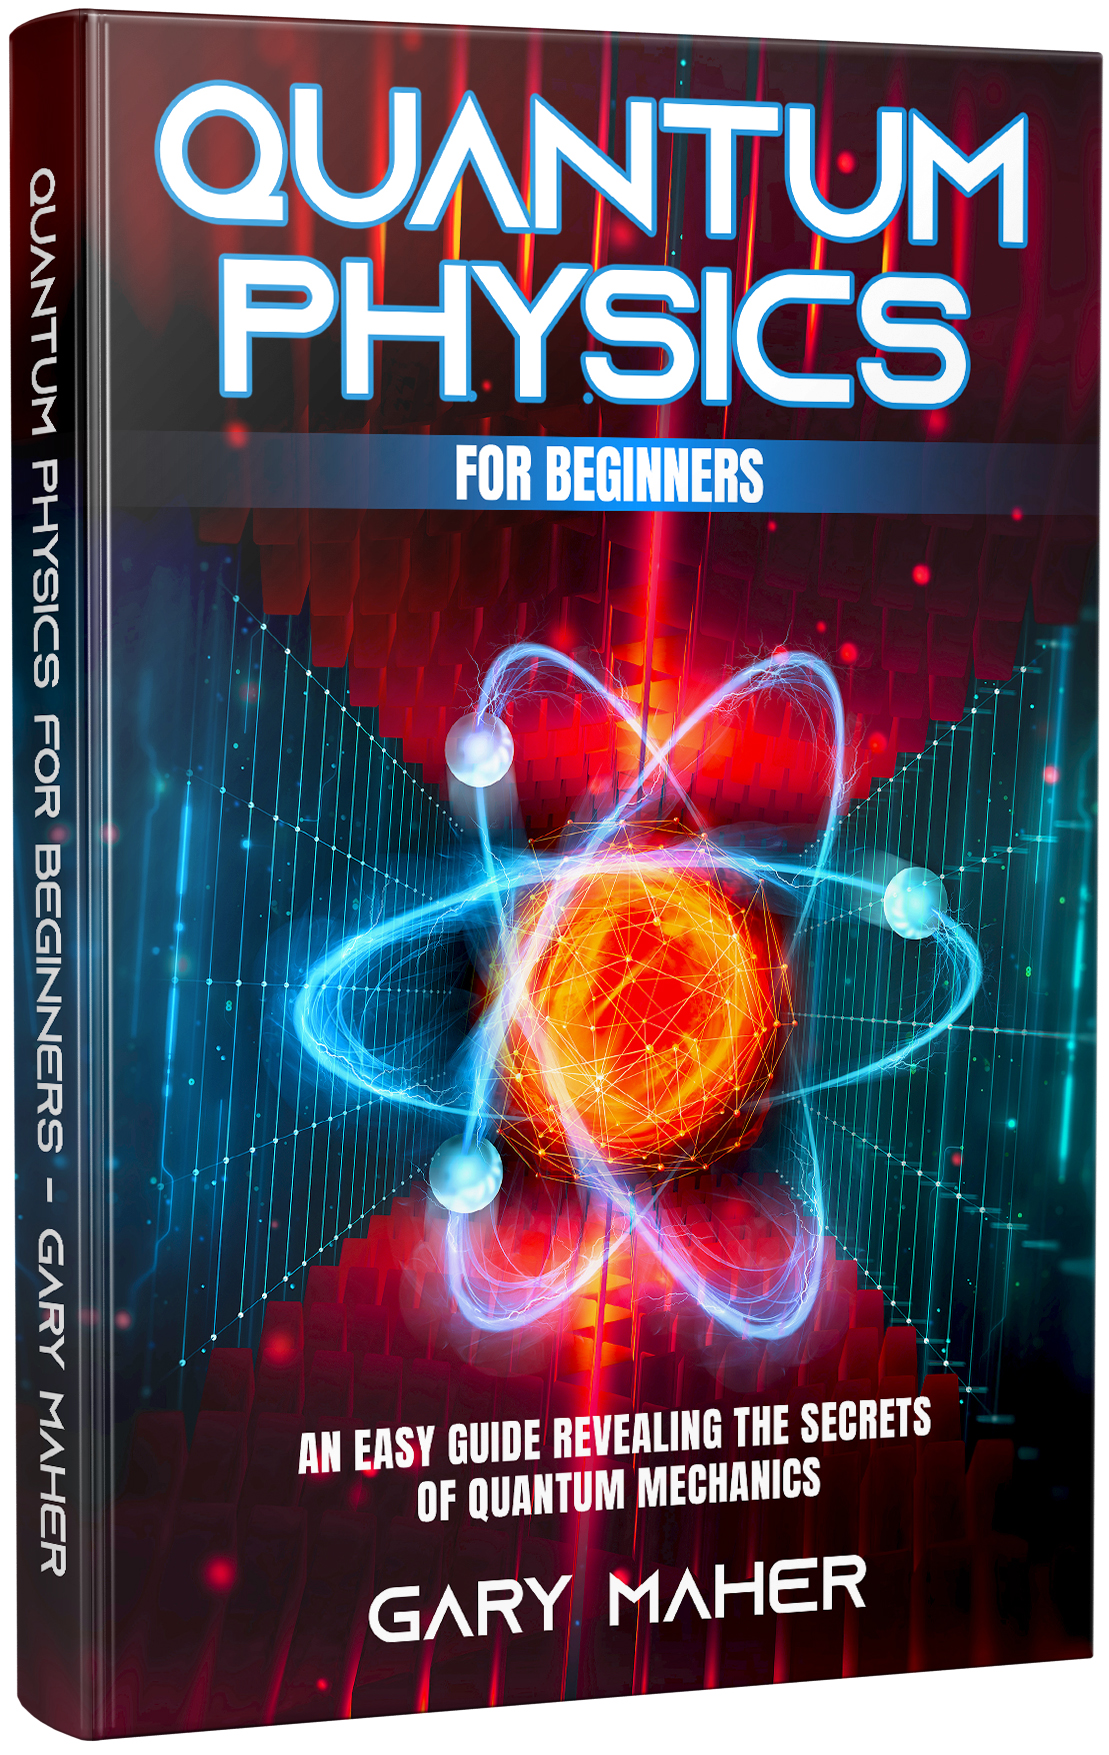 FREE: Quantum Physics for Beginners: An Easy Guide Revealing the Secrets of Quantum Mechanics by Gary Maher